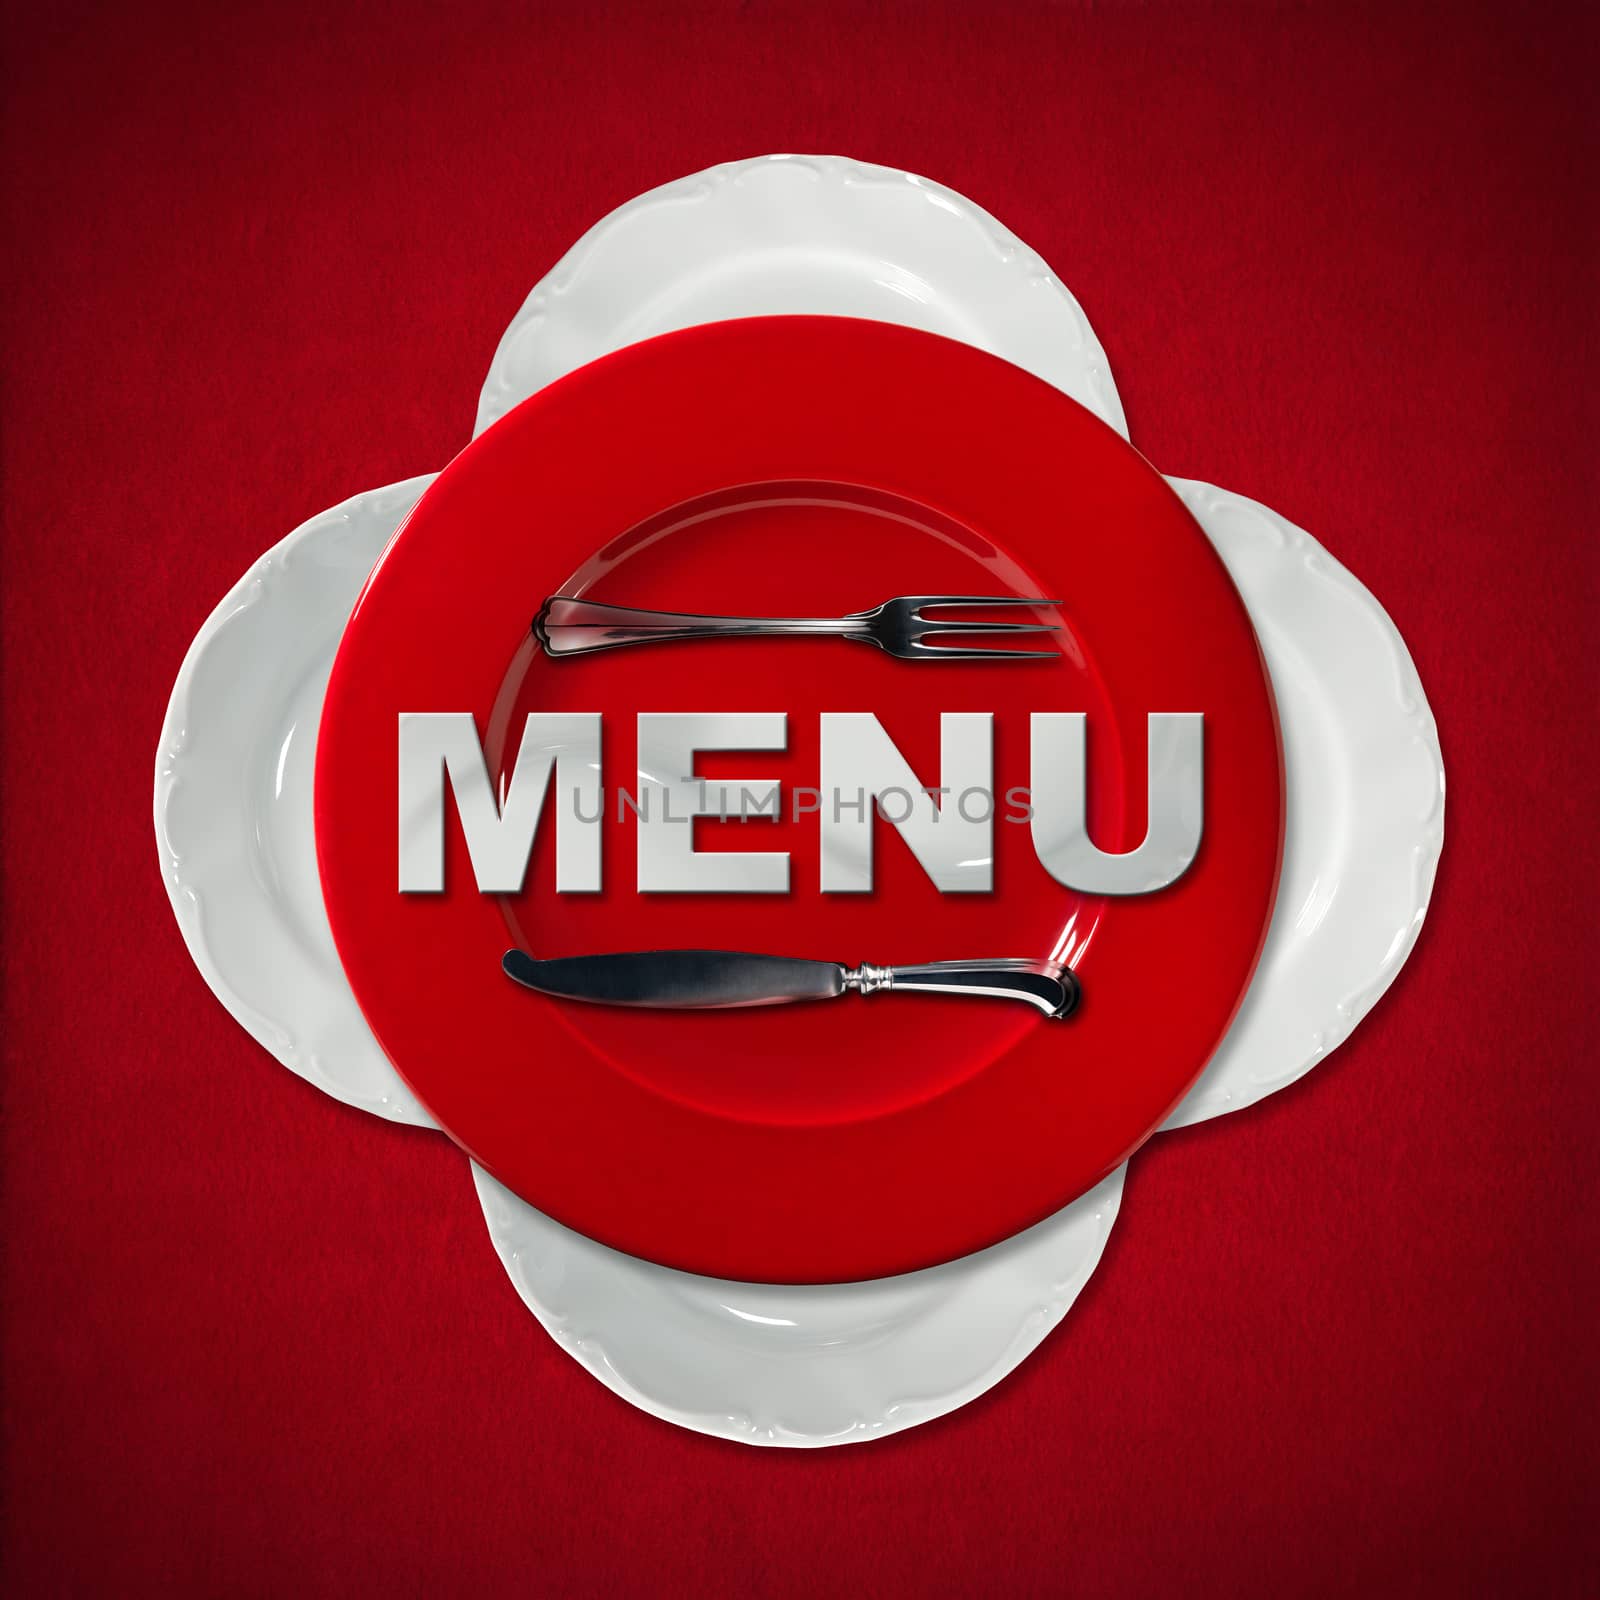 Restaurant menu with a red plate and four white plates with silver cutlery on red velvet background with shadows. Text Menu in white ceramic